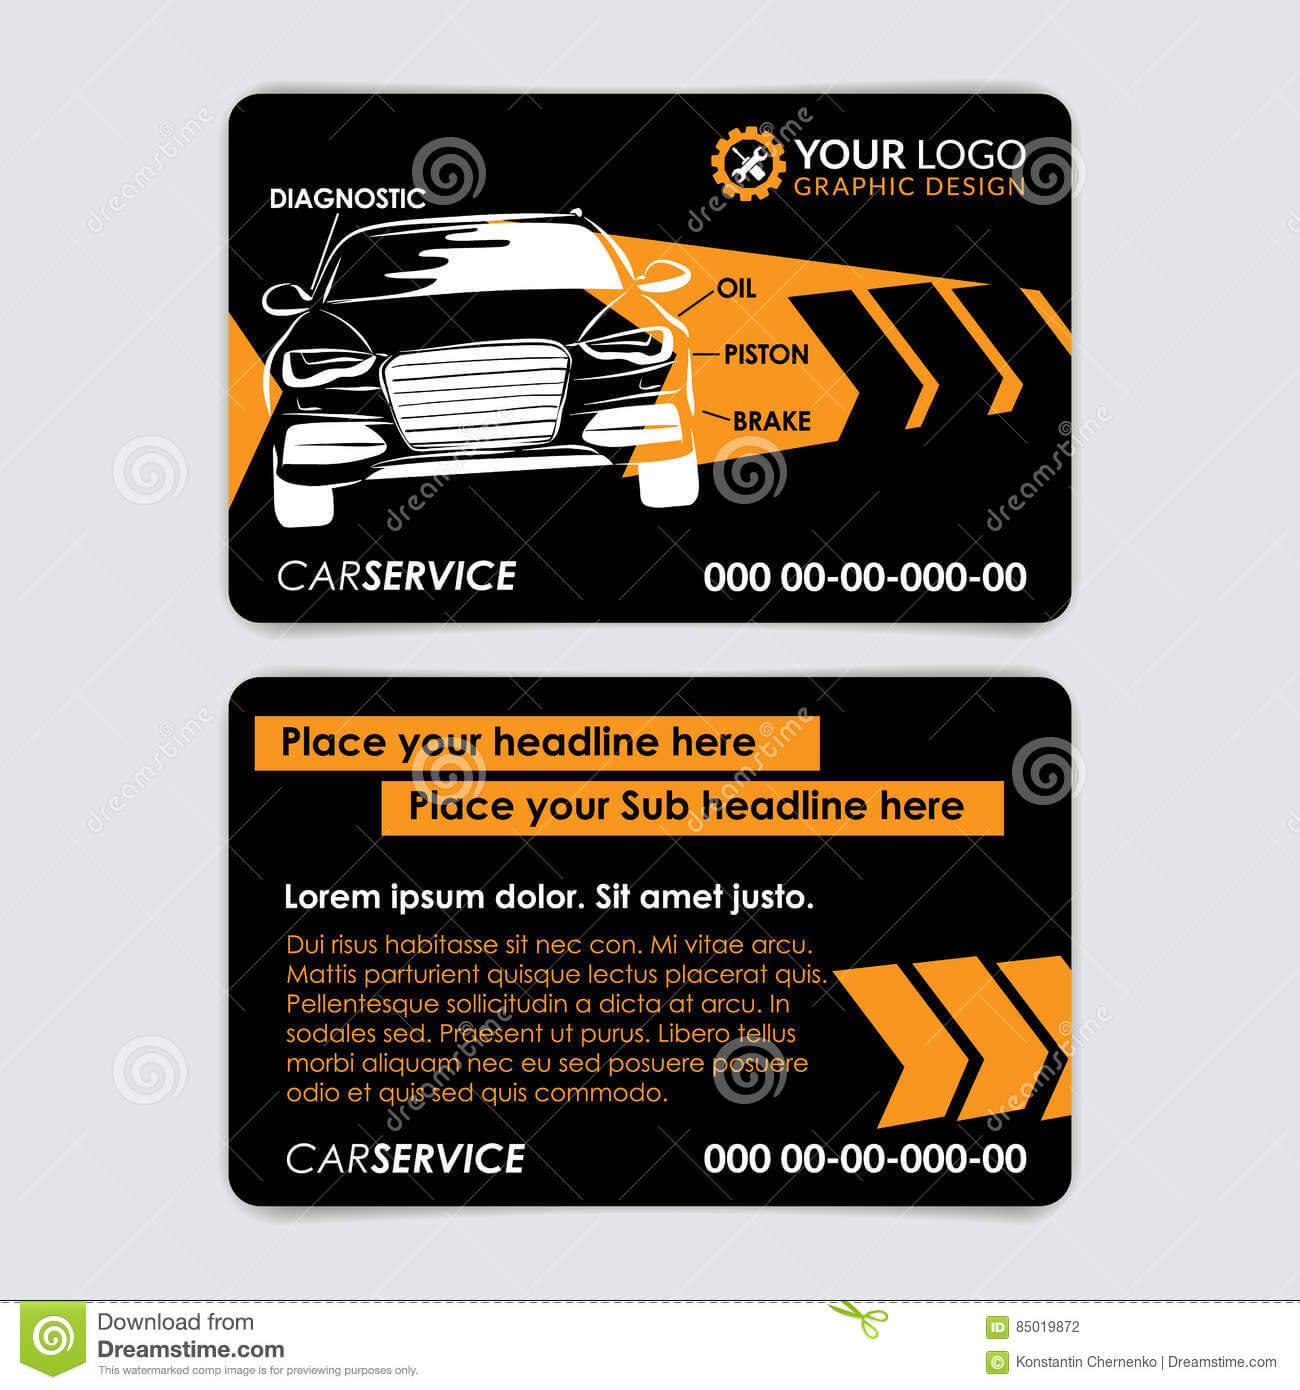 Auto Repair Business Card Template. Create Your Own Business In Automotive Business Card Templates